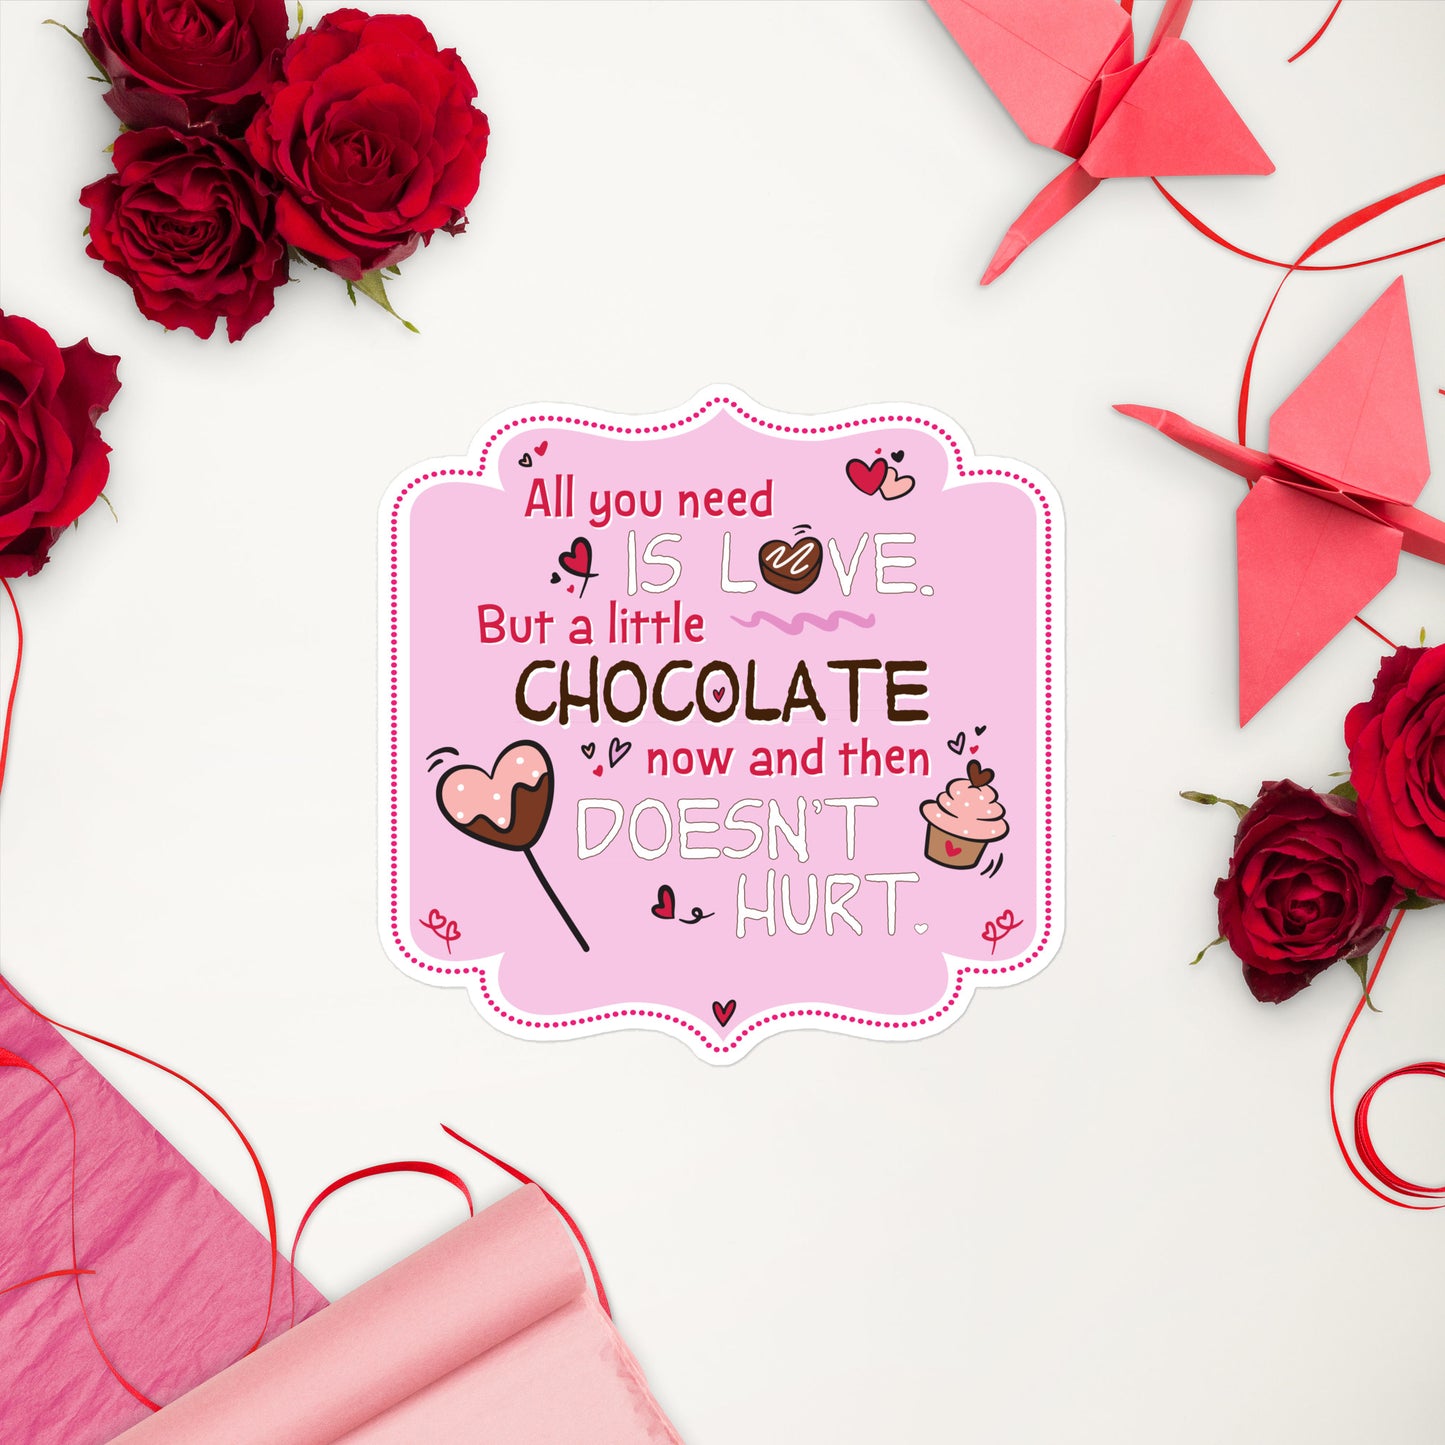 All you need is love and chocolate stickers